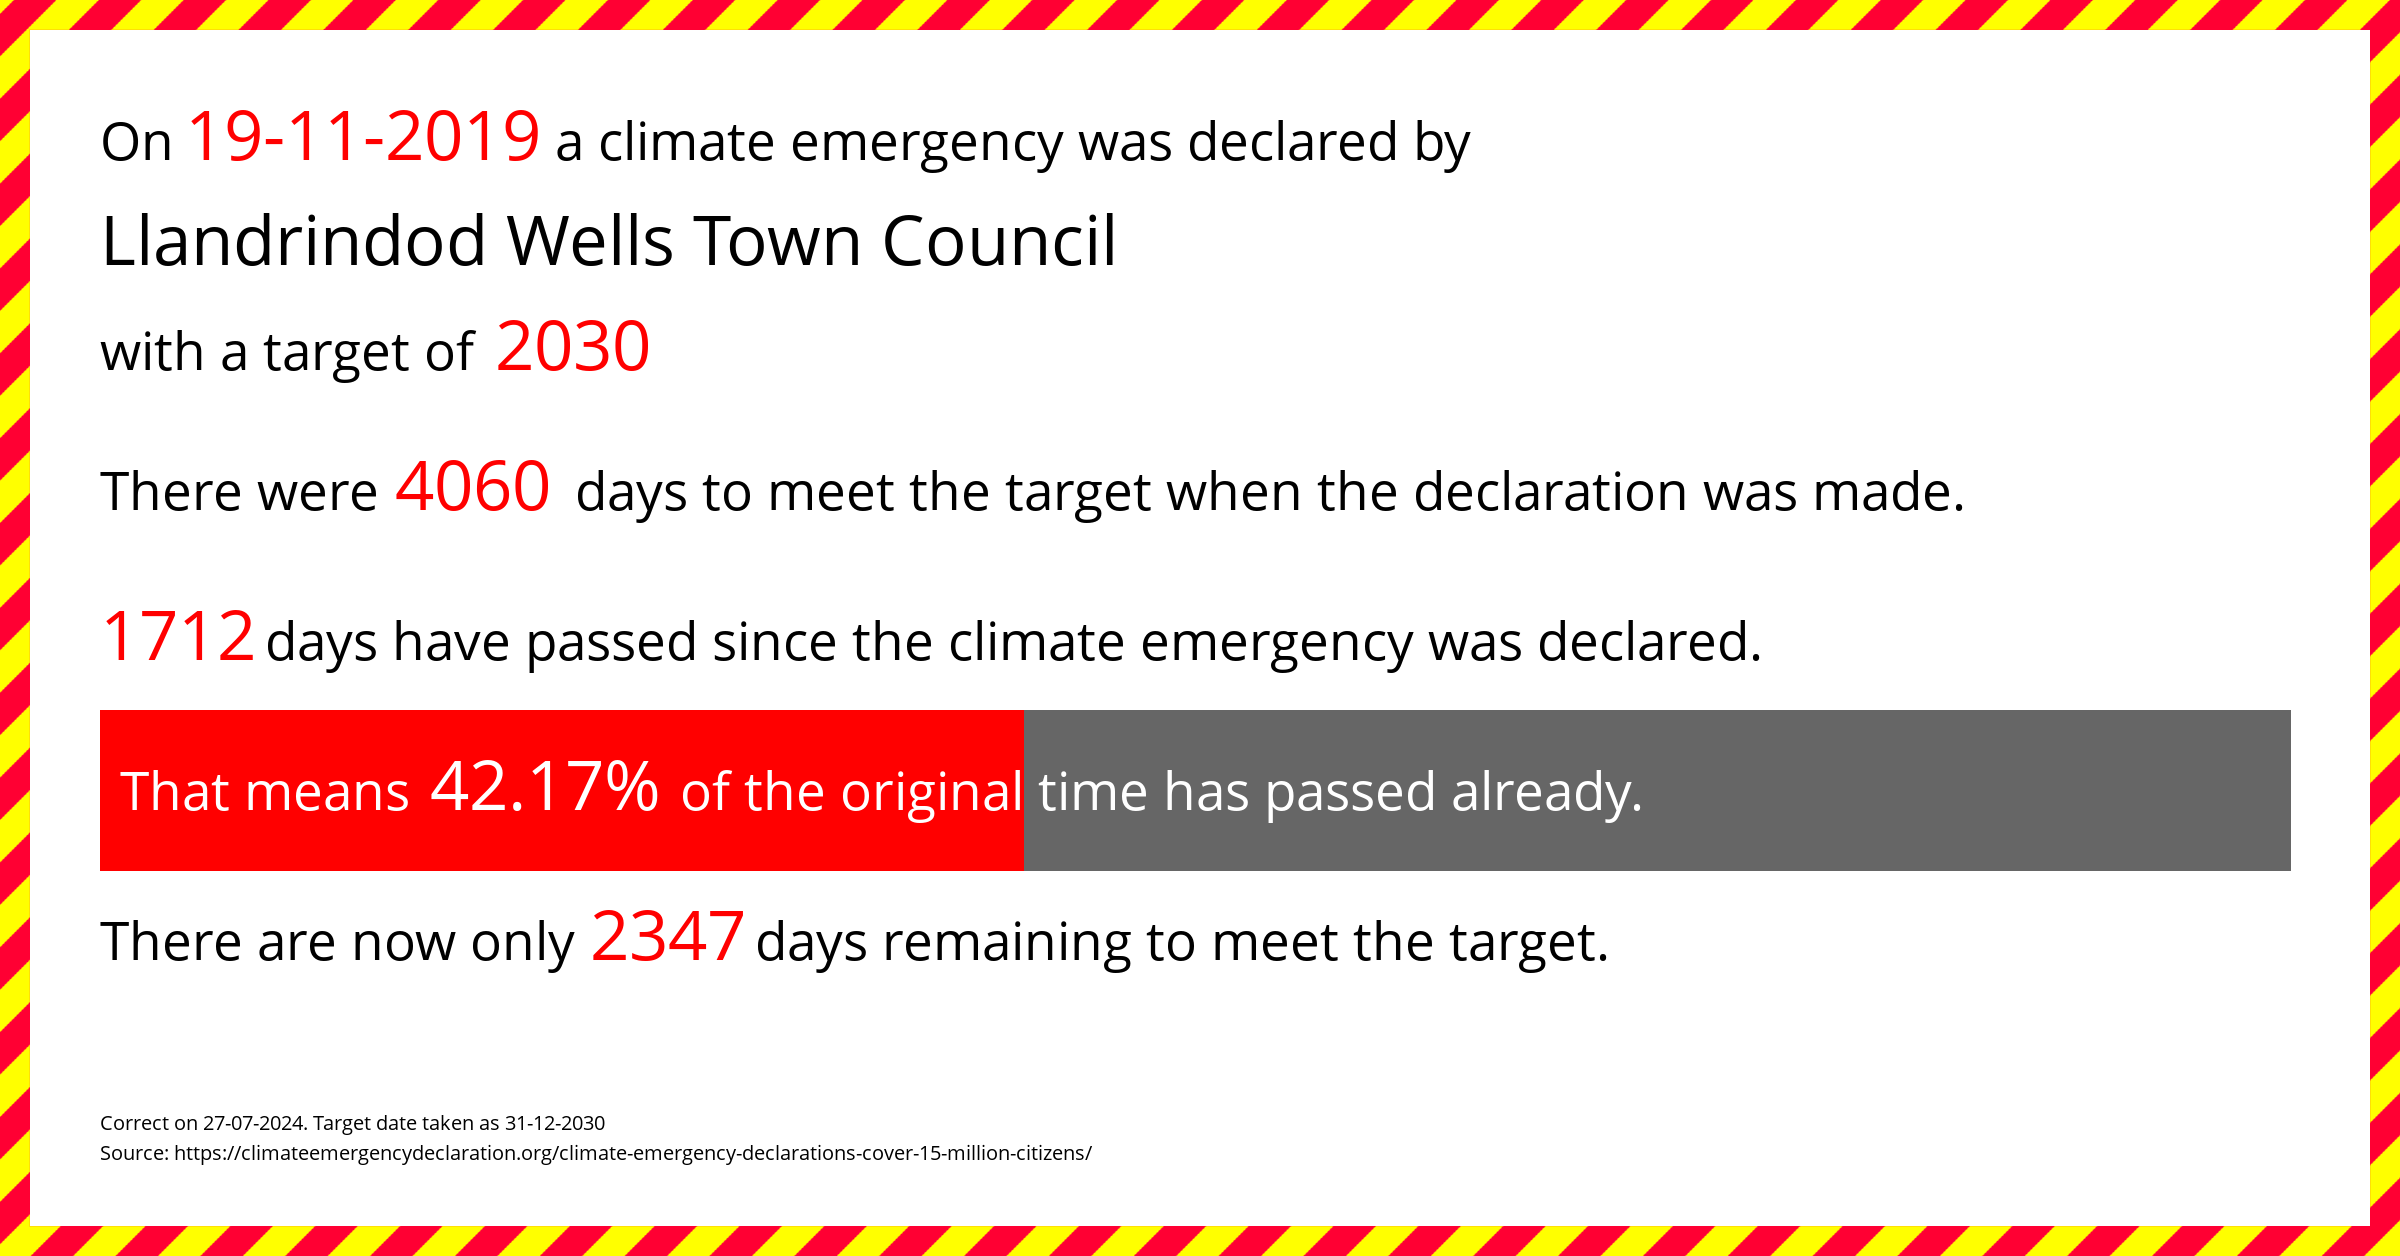 Llandrindod Wells Town Council  declared a Climate emergency on Tuesday 19th November 2019, with a target of 2030.